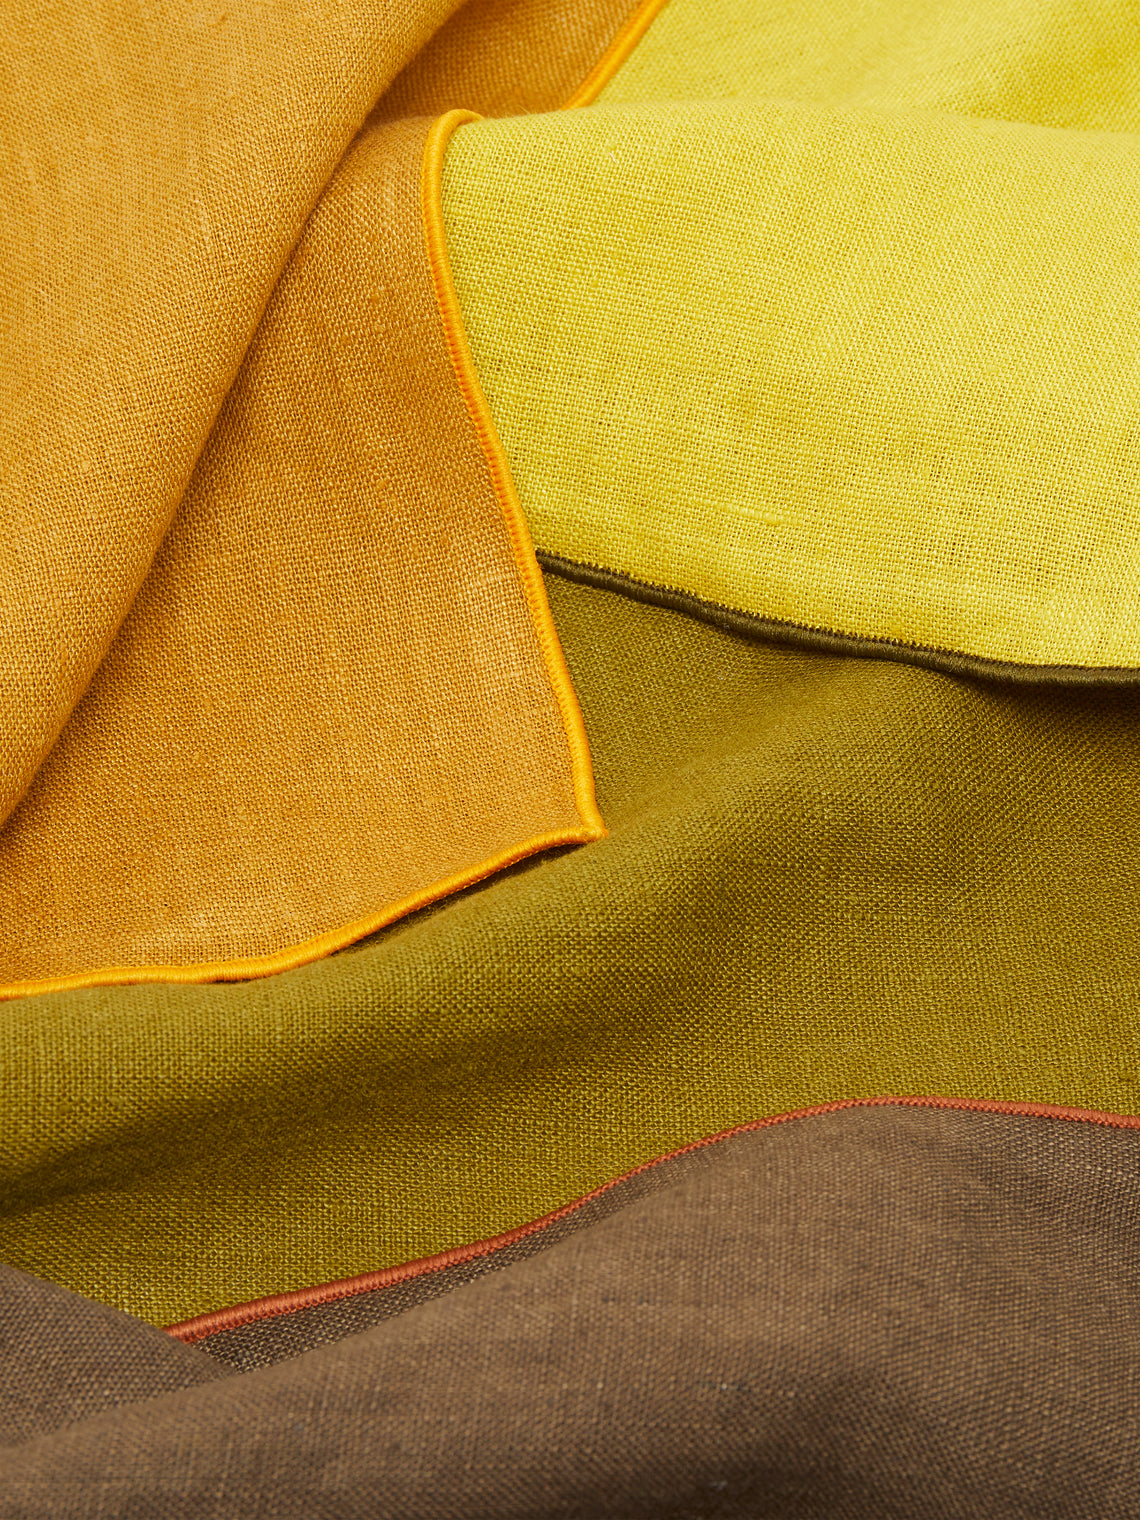 Madre Linen - Hand-Dyed Linen Contrast-Edge Napkins (Set of 4) - Yellow - ABASK